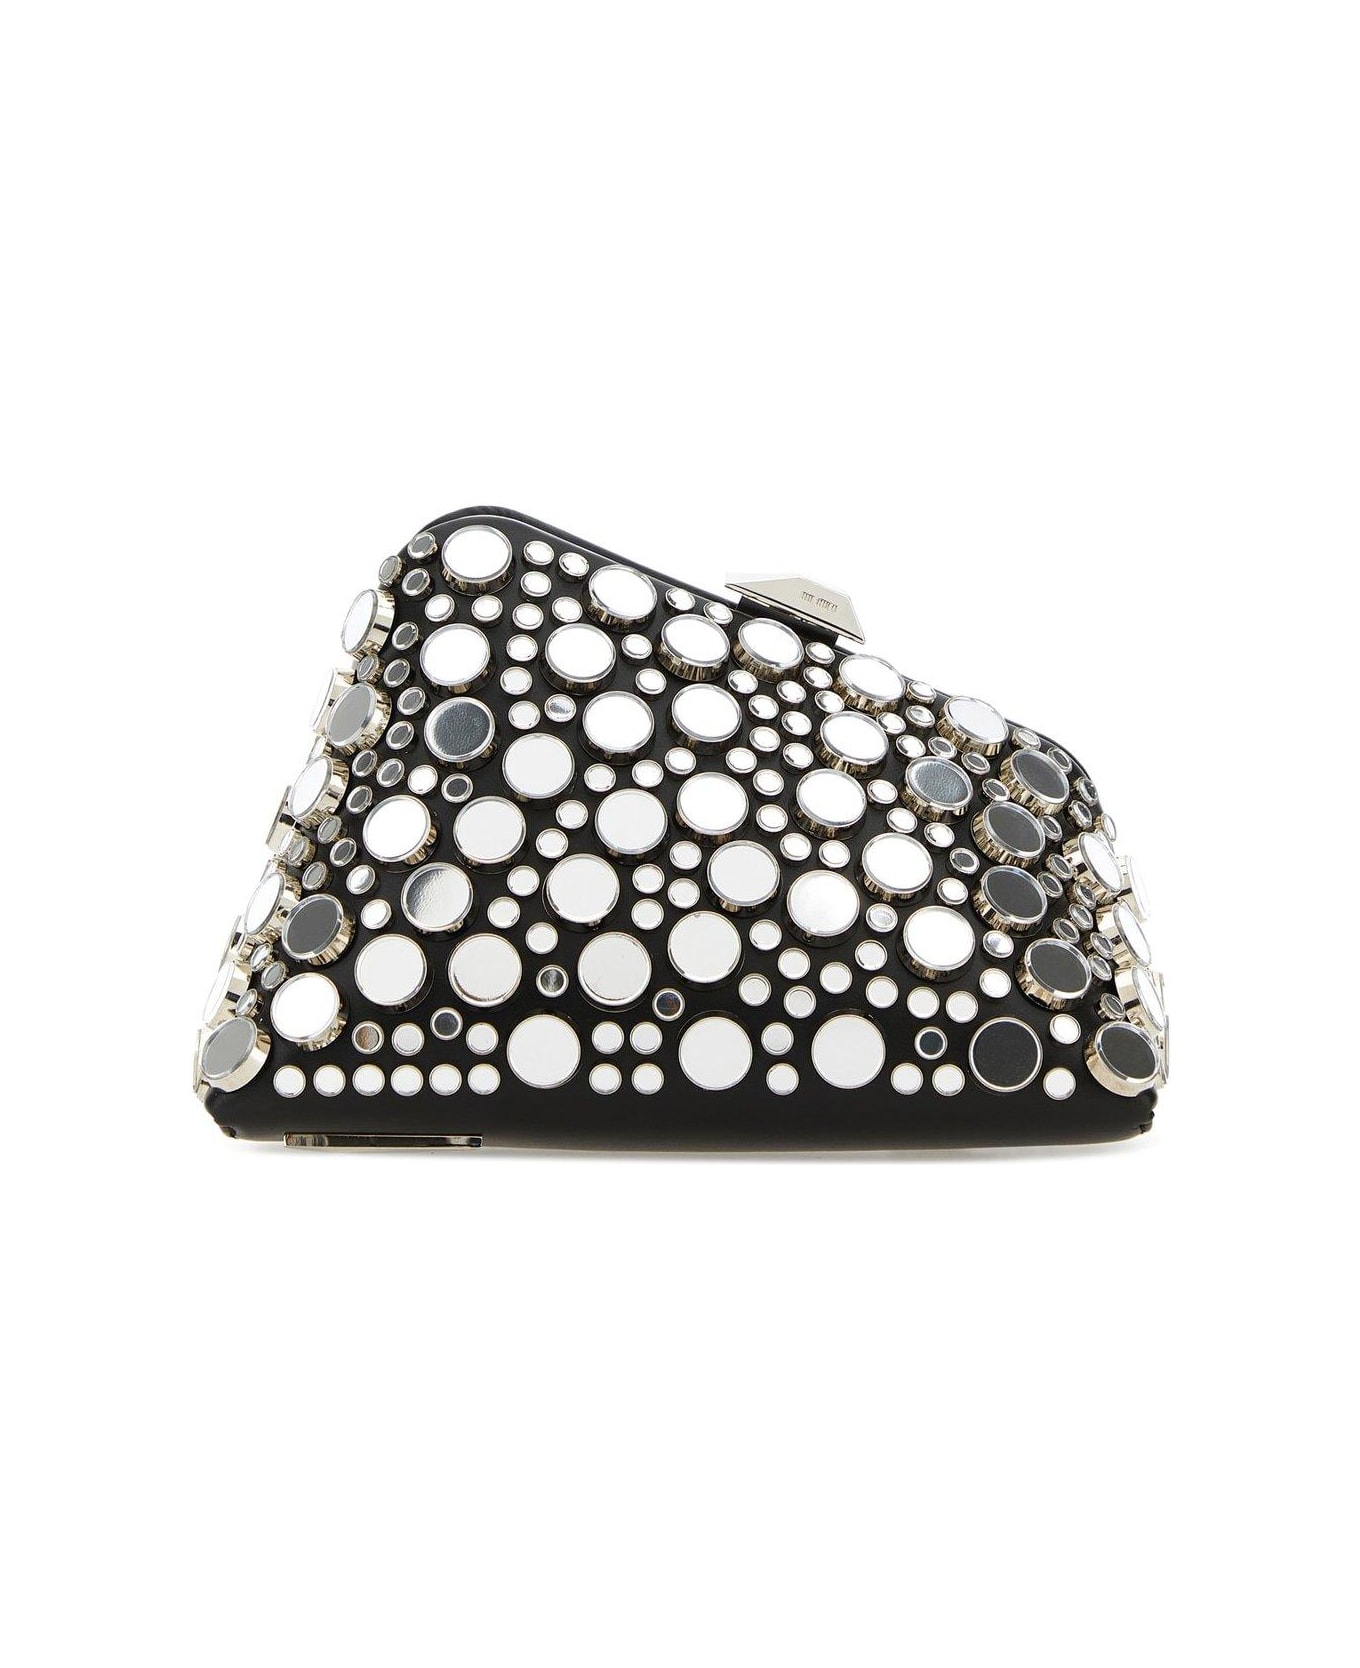 The Attico Midnight Stud-embellished Clutch Bag - Black クラッチバッグ